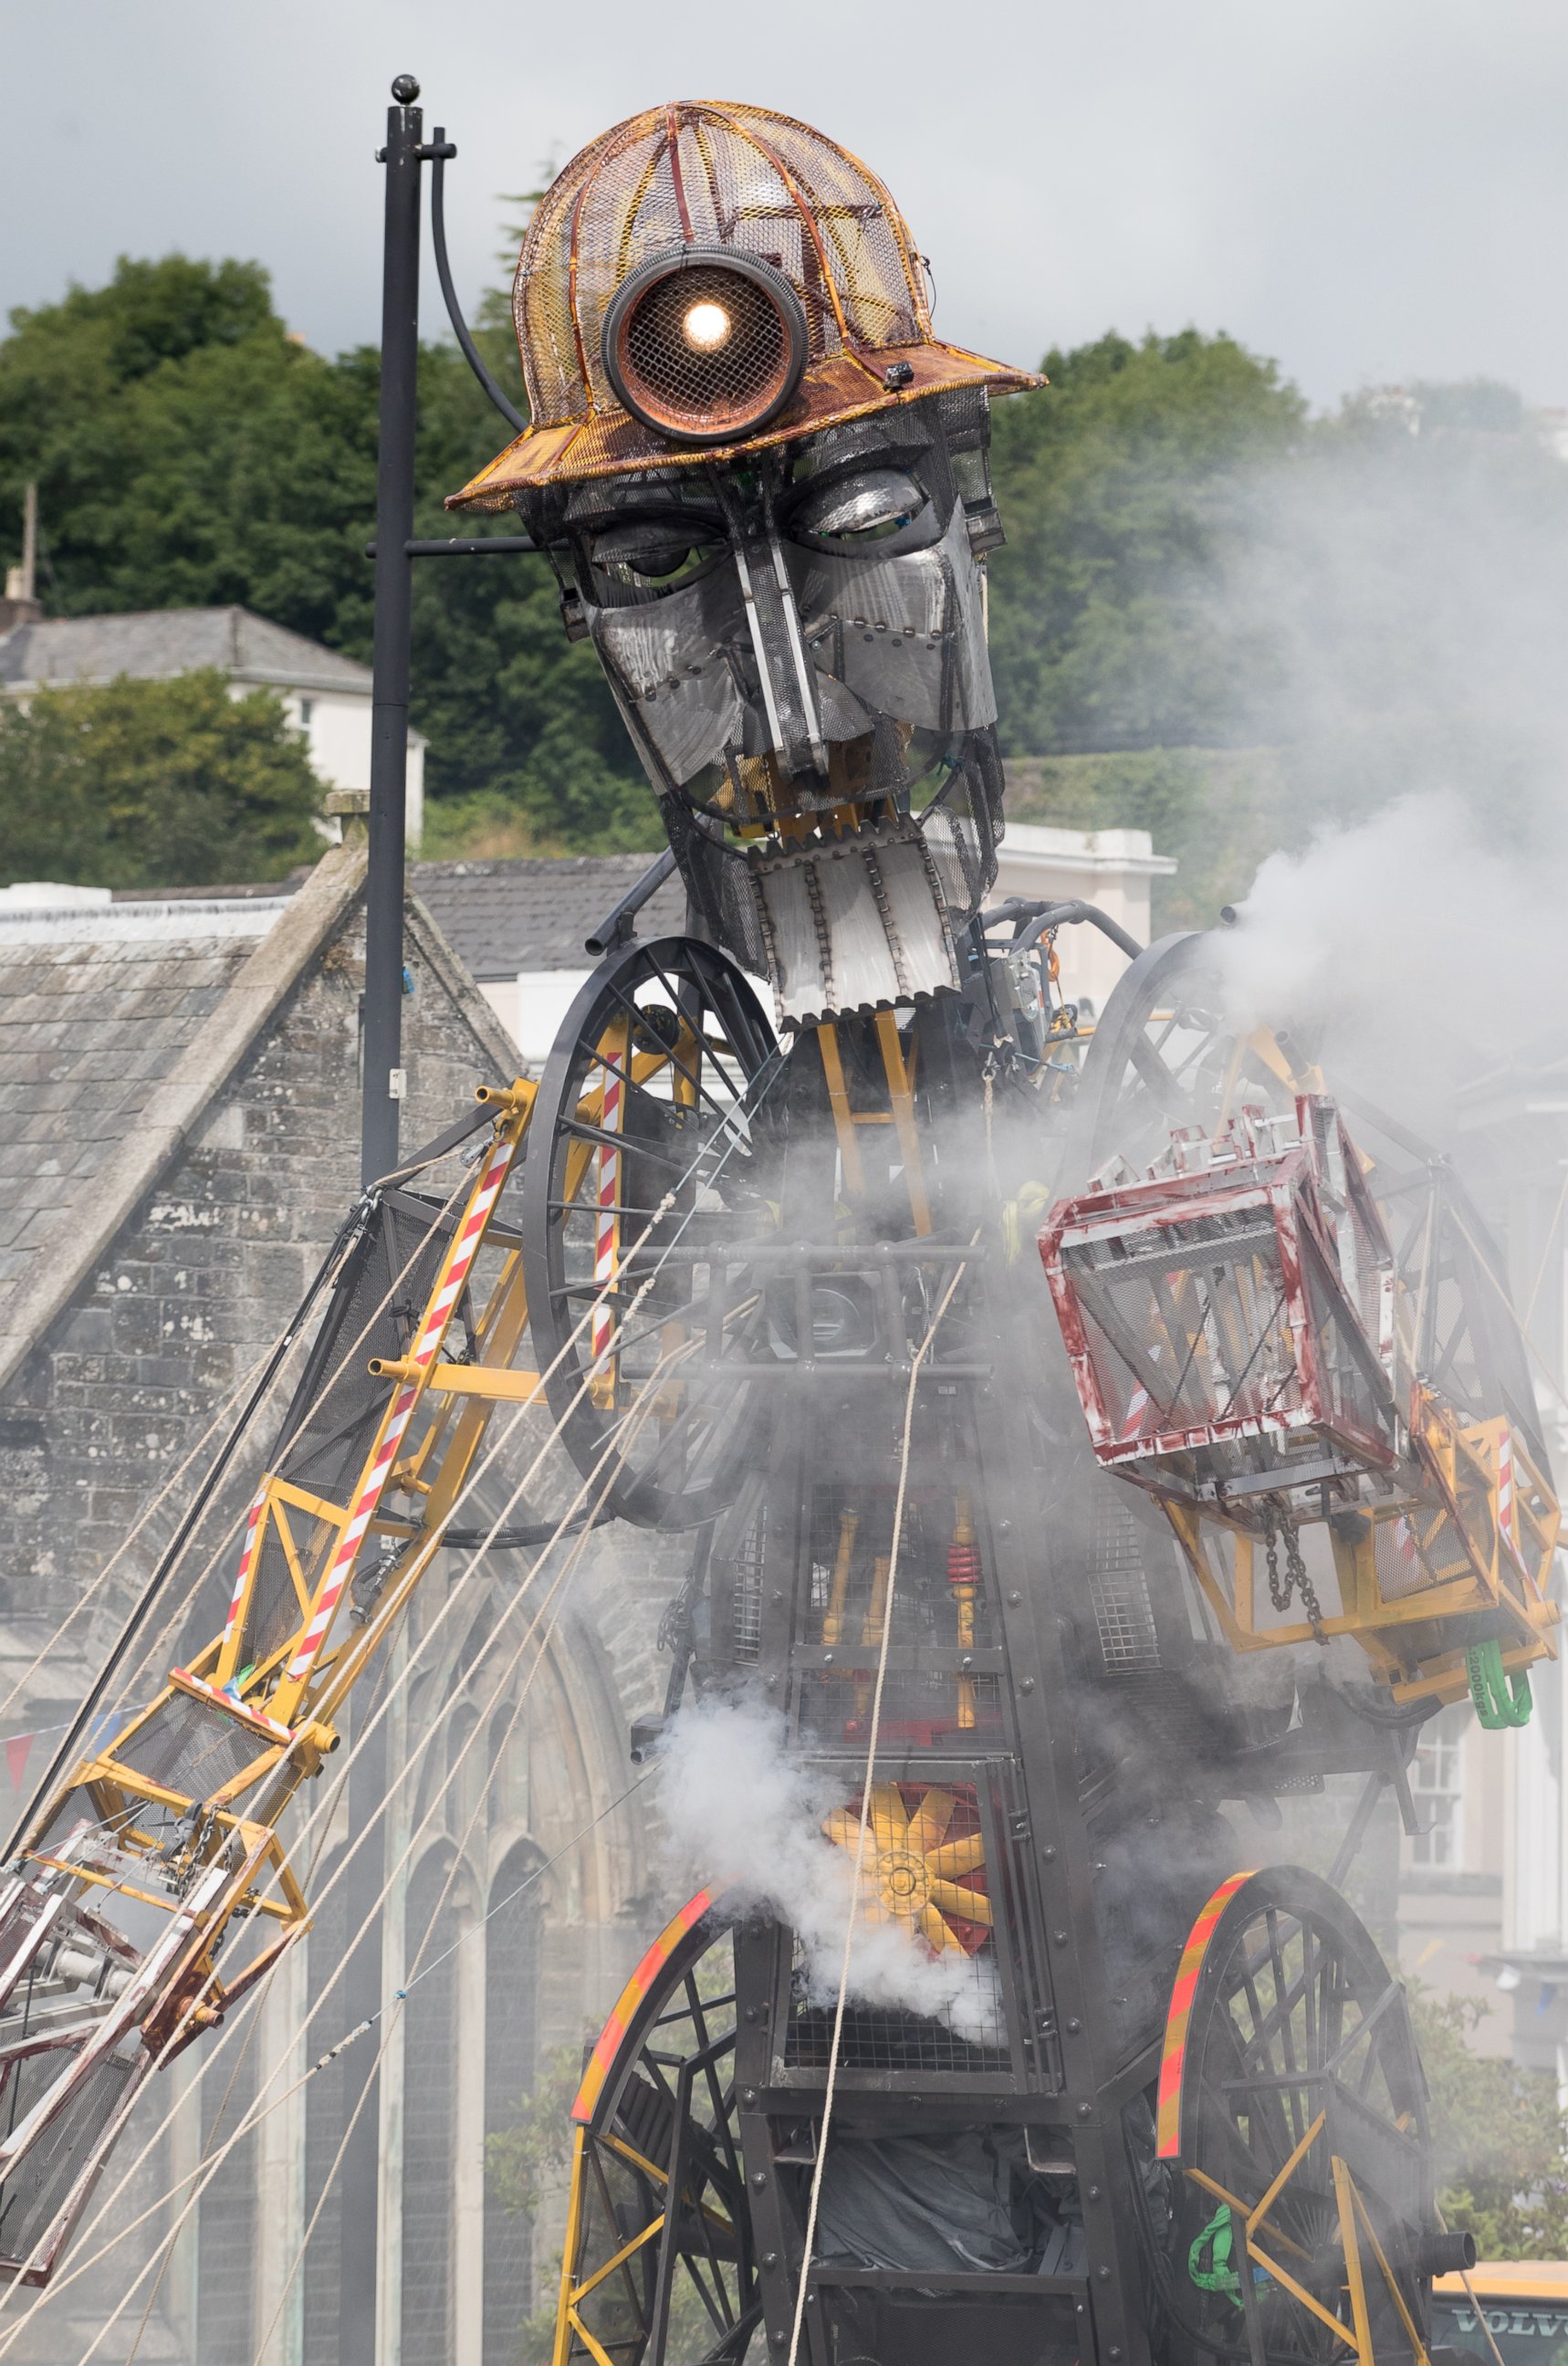 PHOTO: The giant tall Man Engine is unveiled to the public in Tavistock, July 25, 2016, in Devon, England.